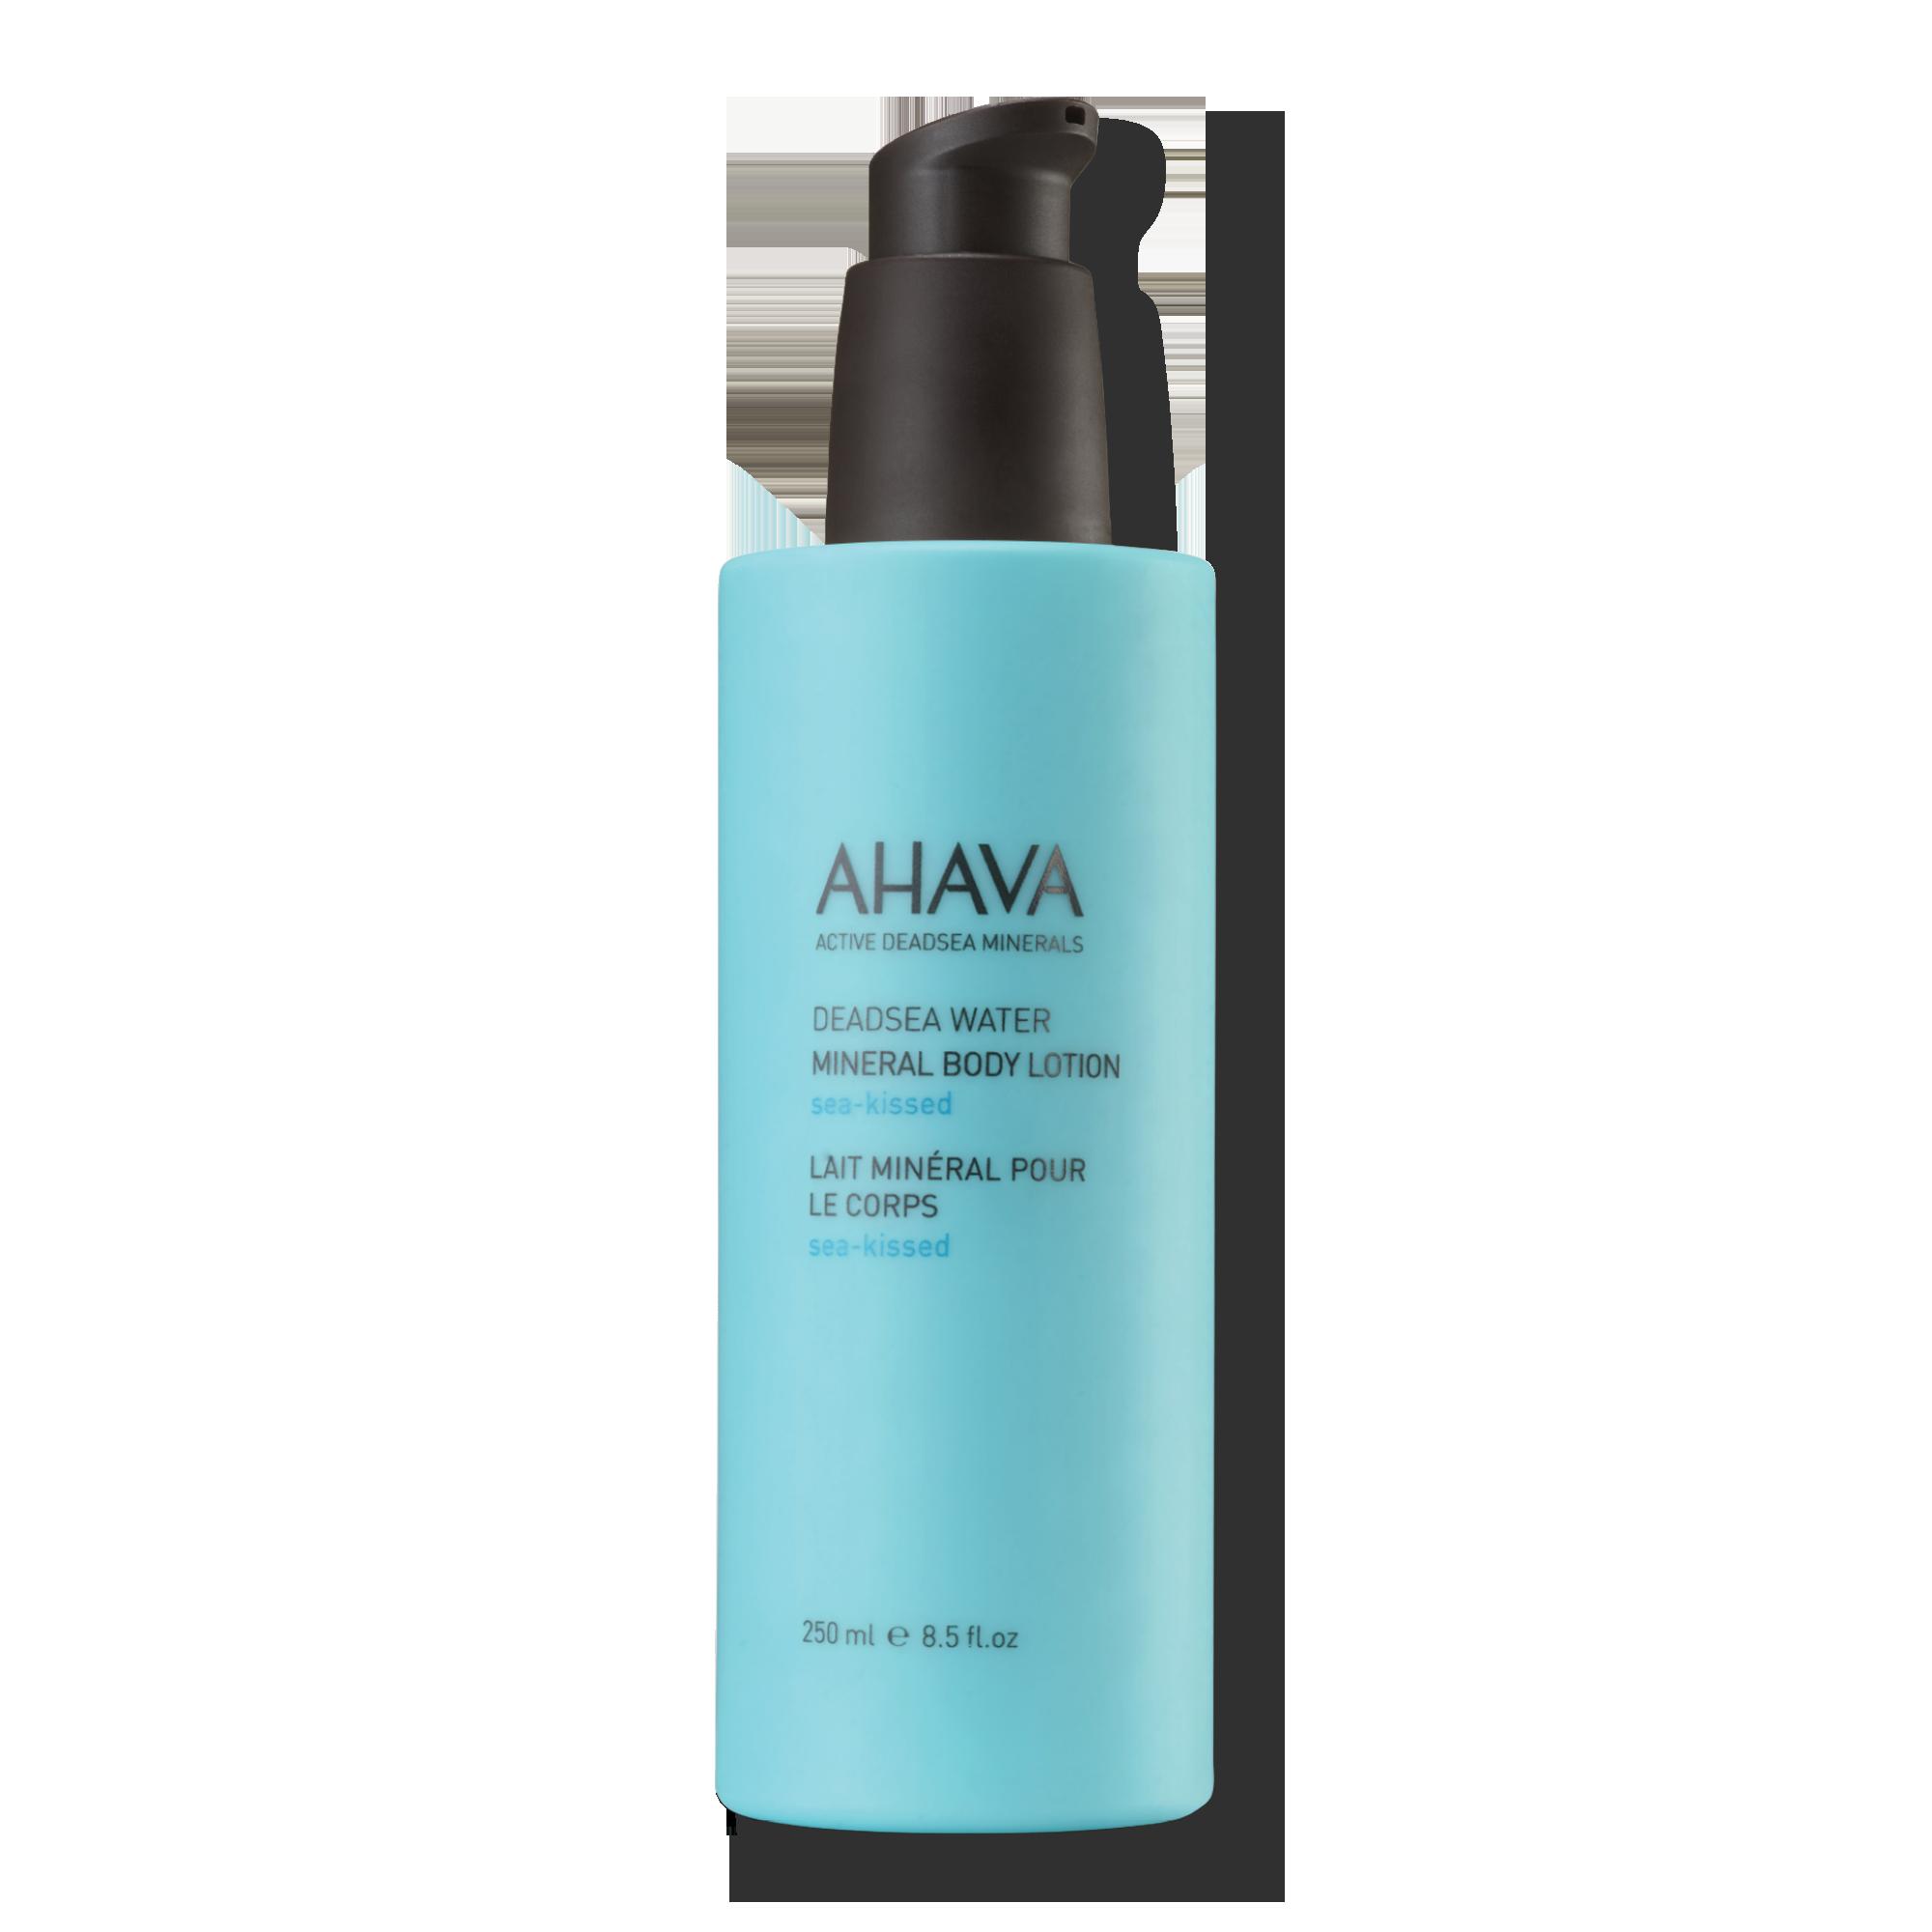 salebath.com - Shop at Ahava Discount Online Mineral Body Lotion Sea-Kissed for great prices and free shipping orders of $80 or